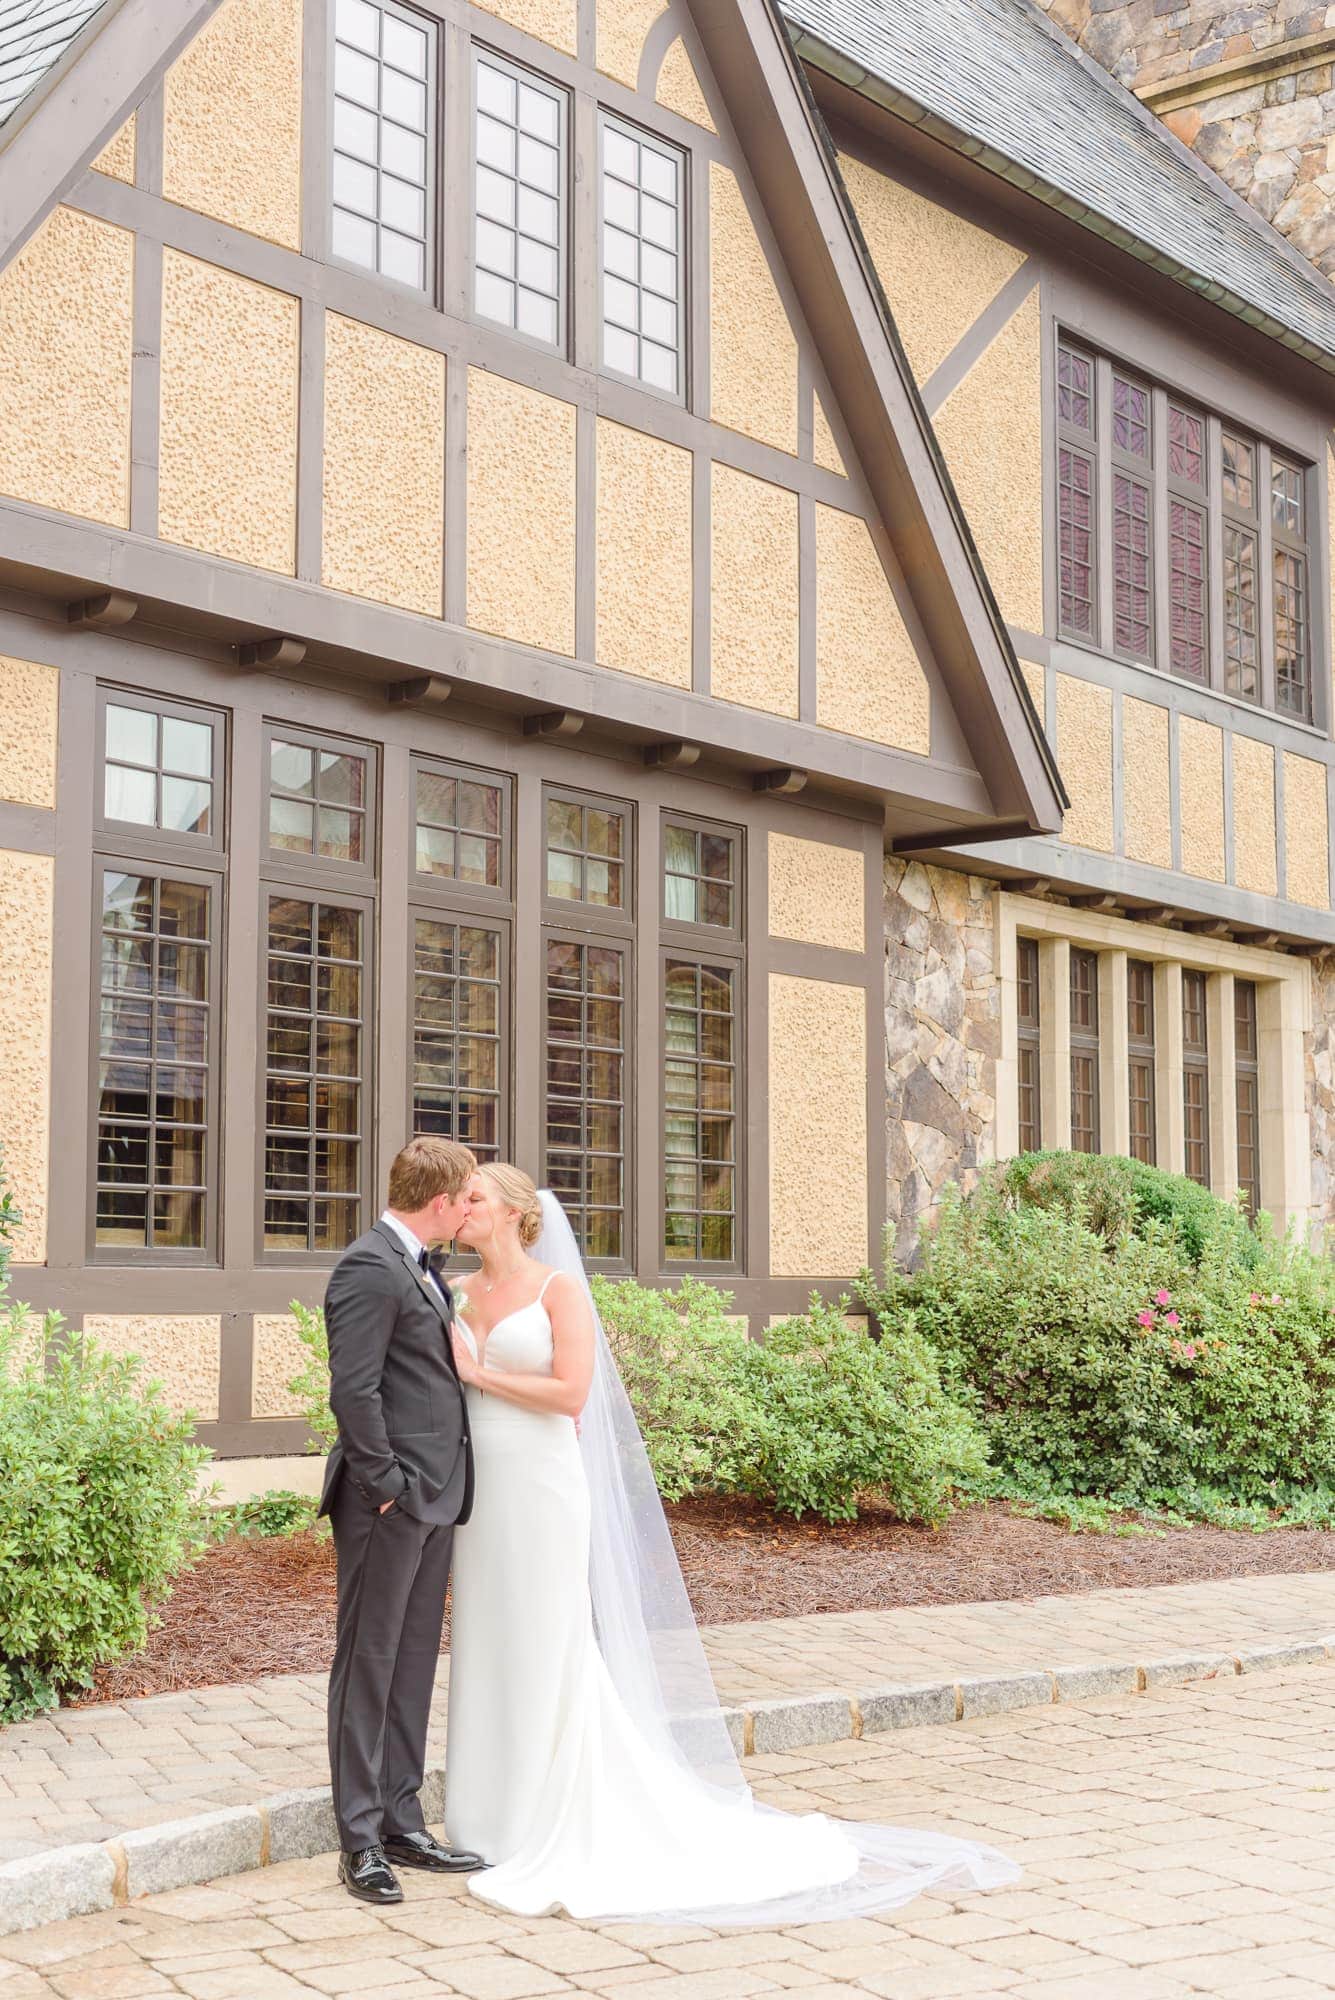 Lauren and Casey share a kiss outside the Longview Country Club in Charlotte.